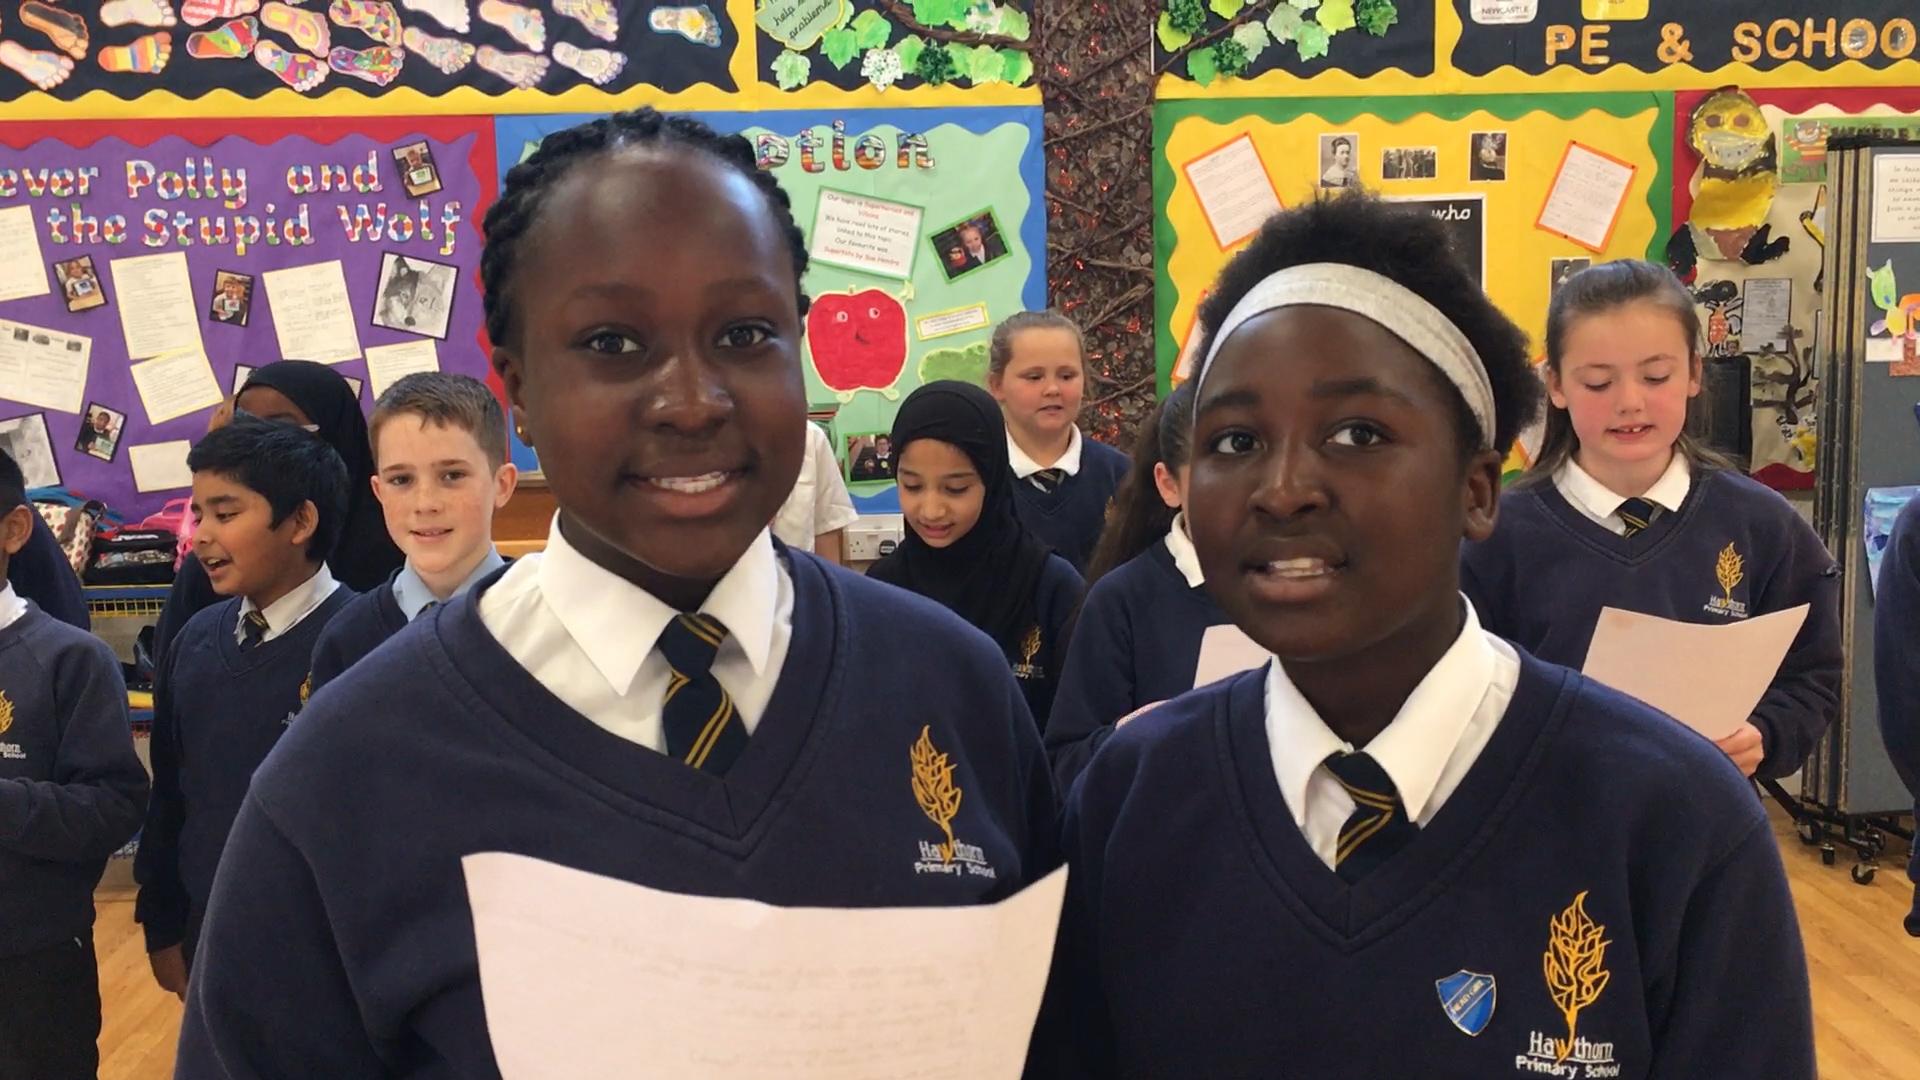 Year six pupils Maz and Jessica and their classmates rewrote Old Town Road